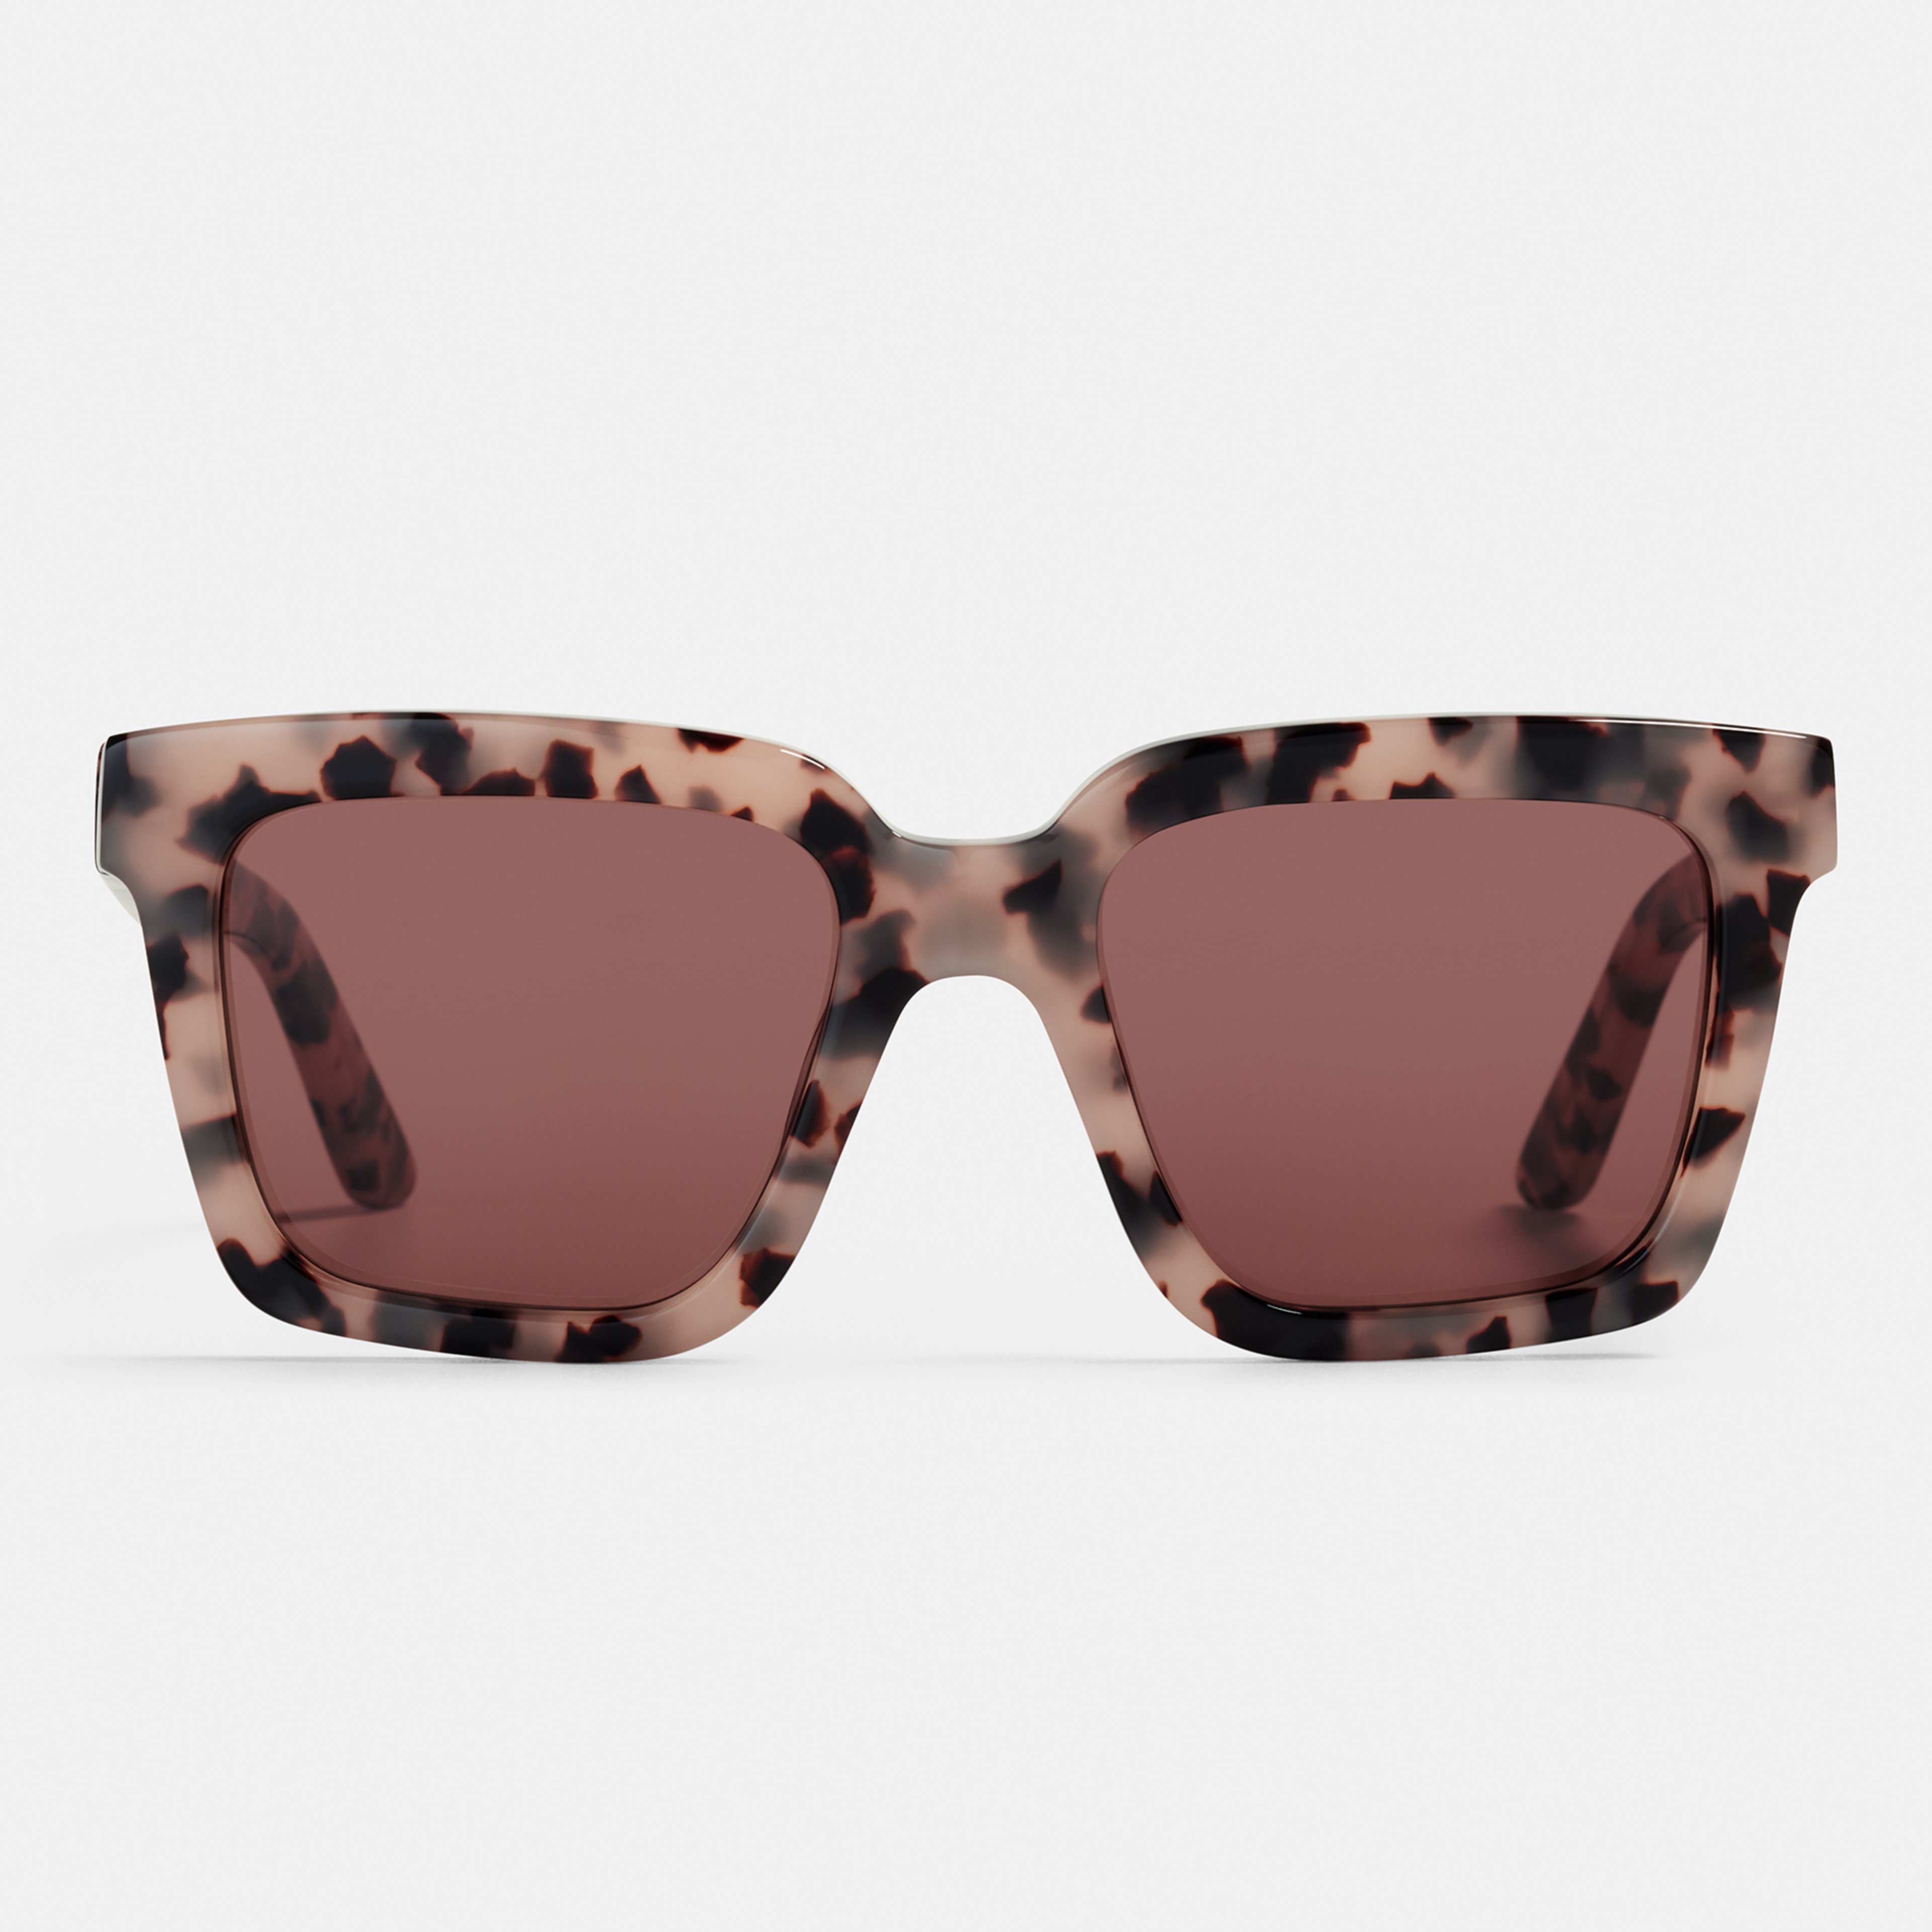 Ace & Tate Solaires |  Acétate in Beige, Marron